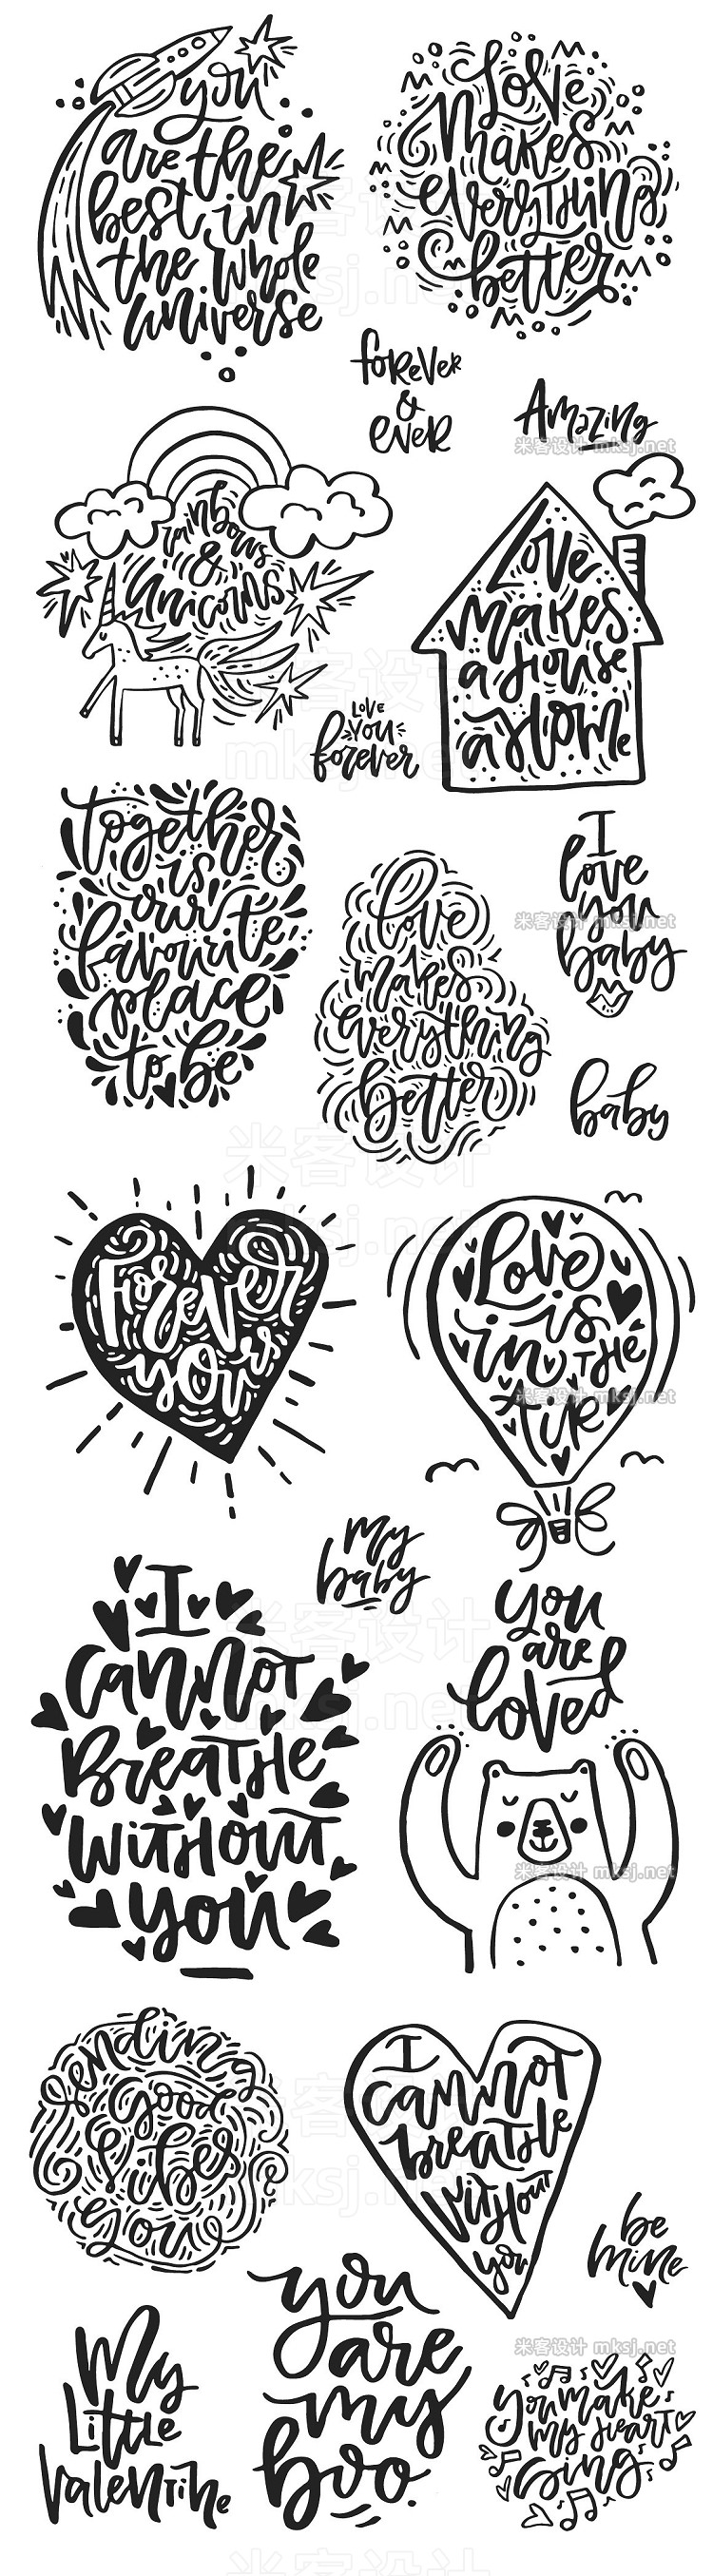 png素材 Valentine's Day Lettering Pack